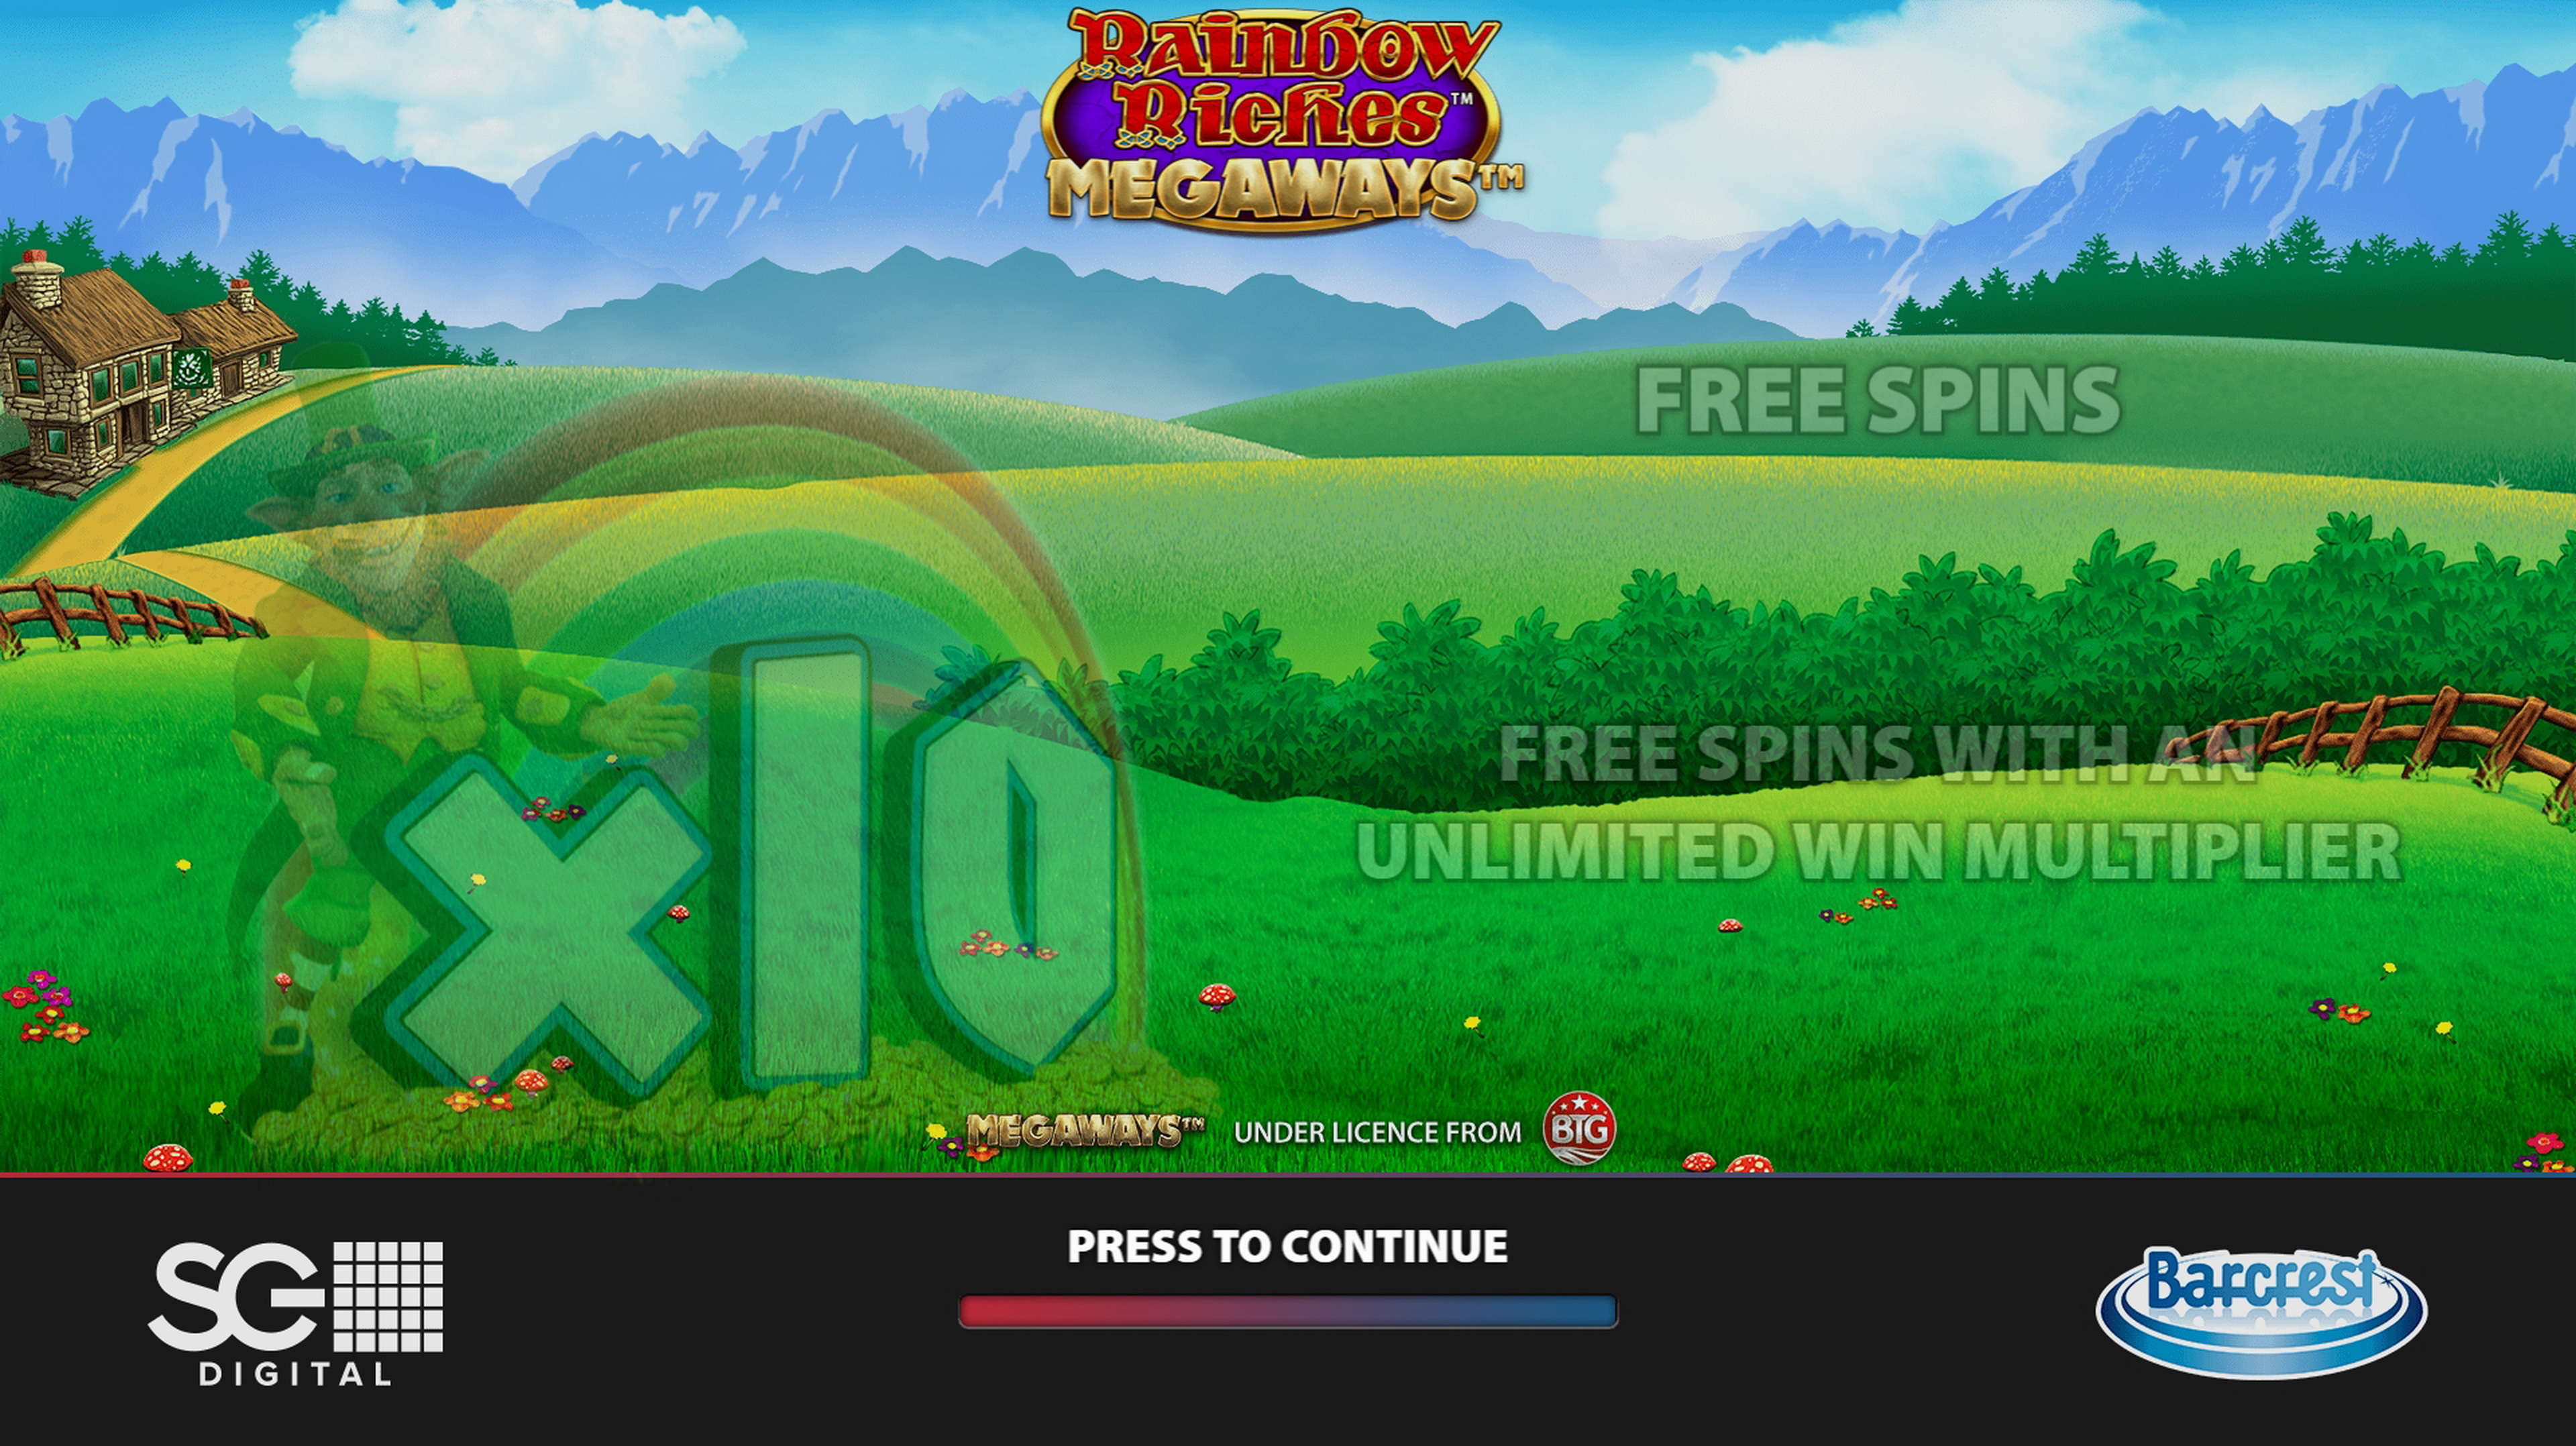 Play Rainbow Riches Megaways Free Casino Slot Game by Barcrest Games